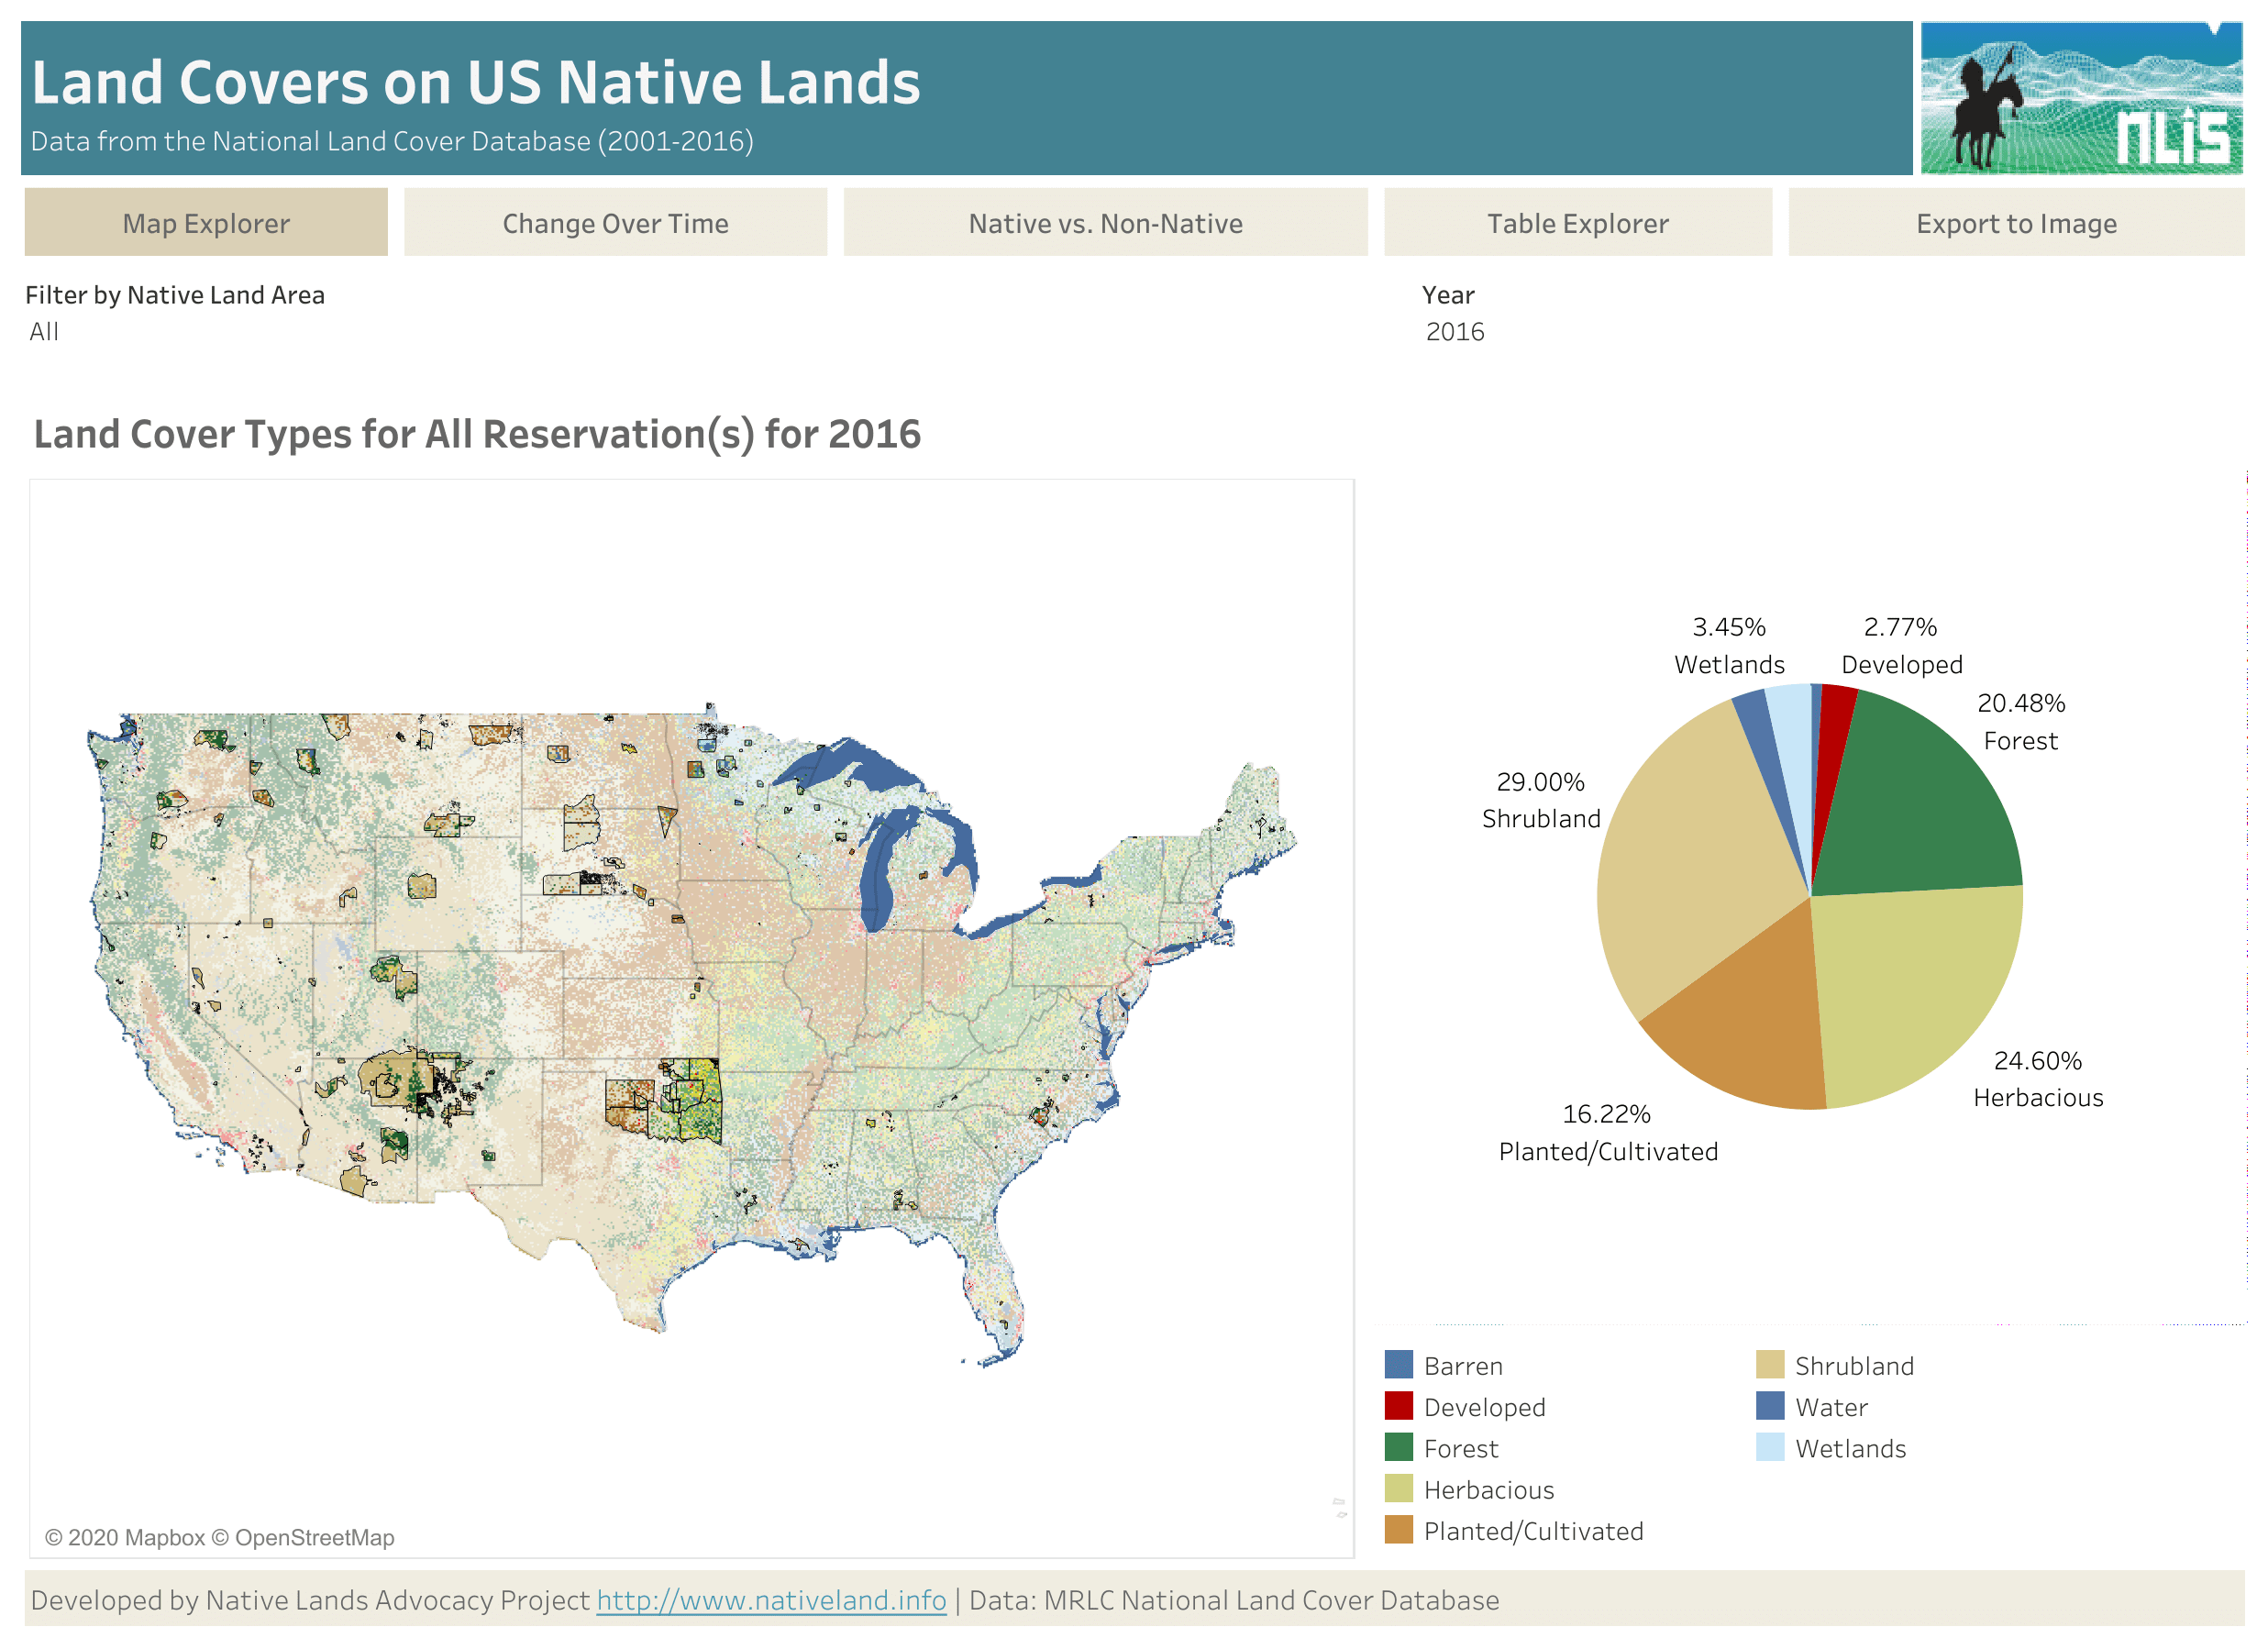 Land Covers on Native Lands in the Coterminous United States